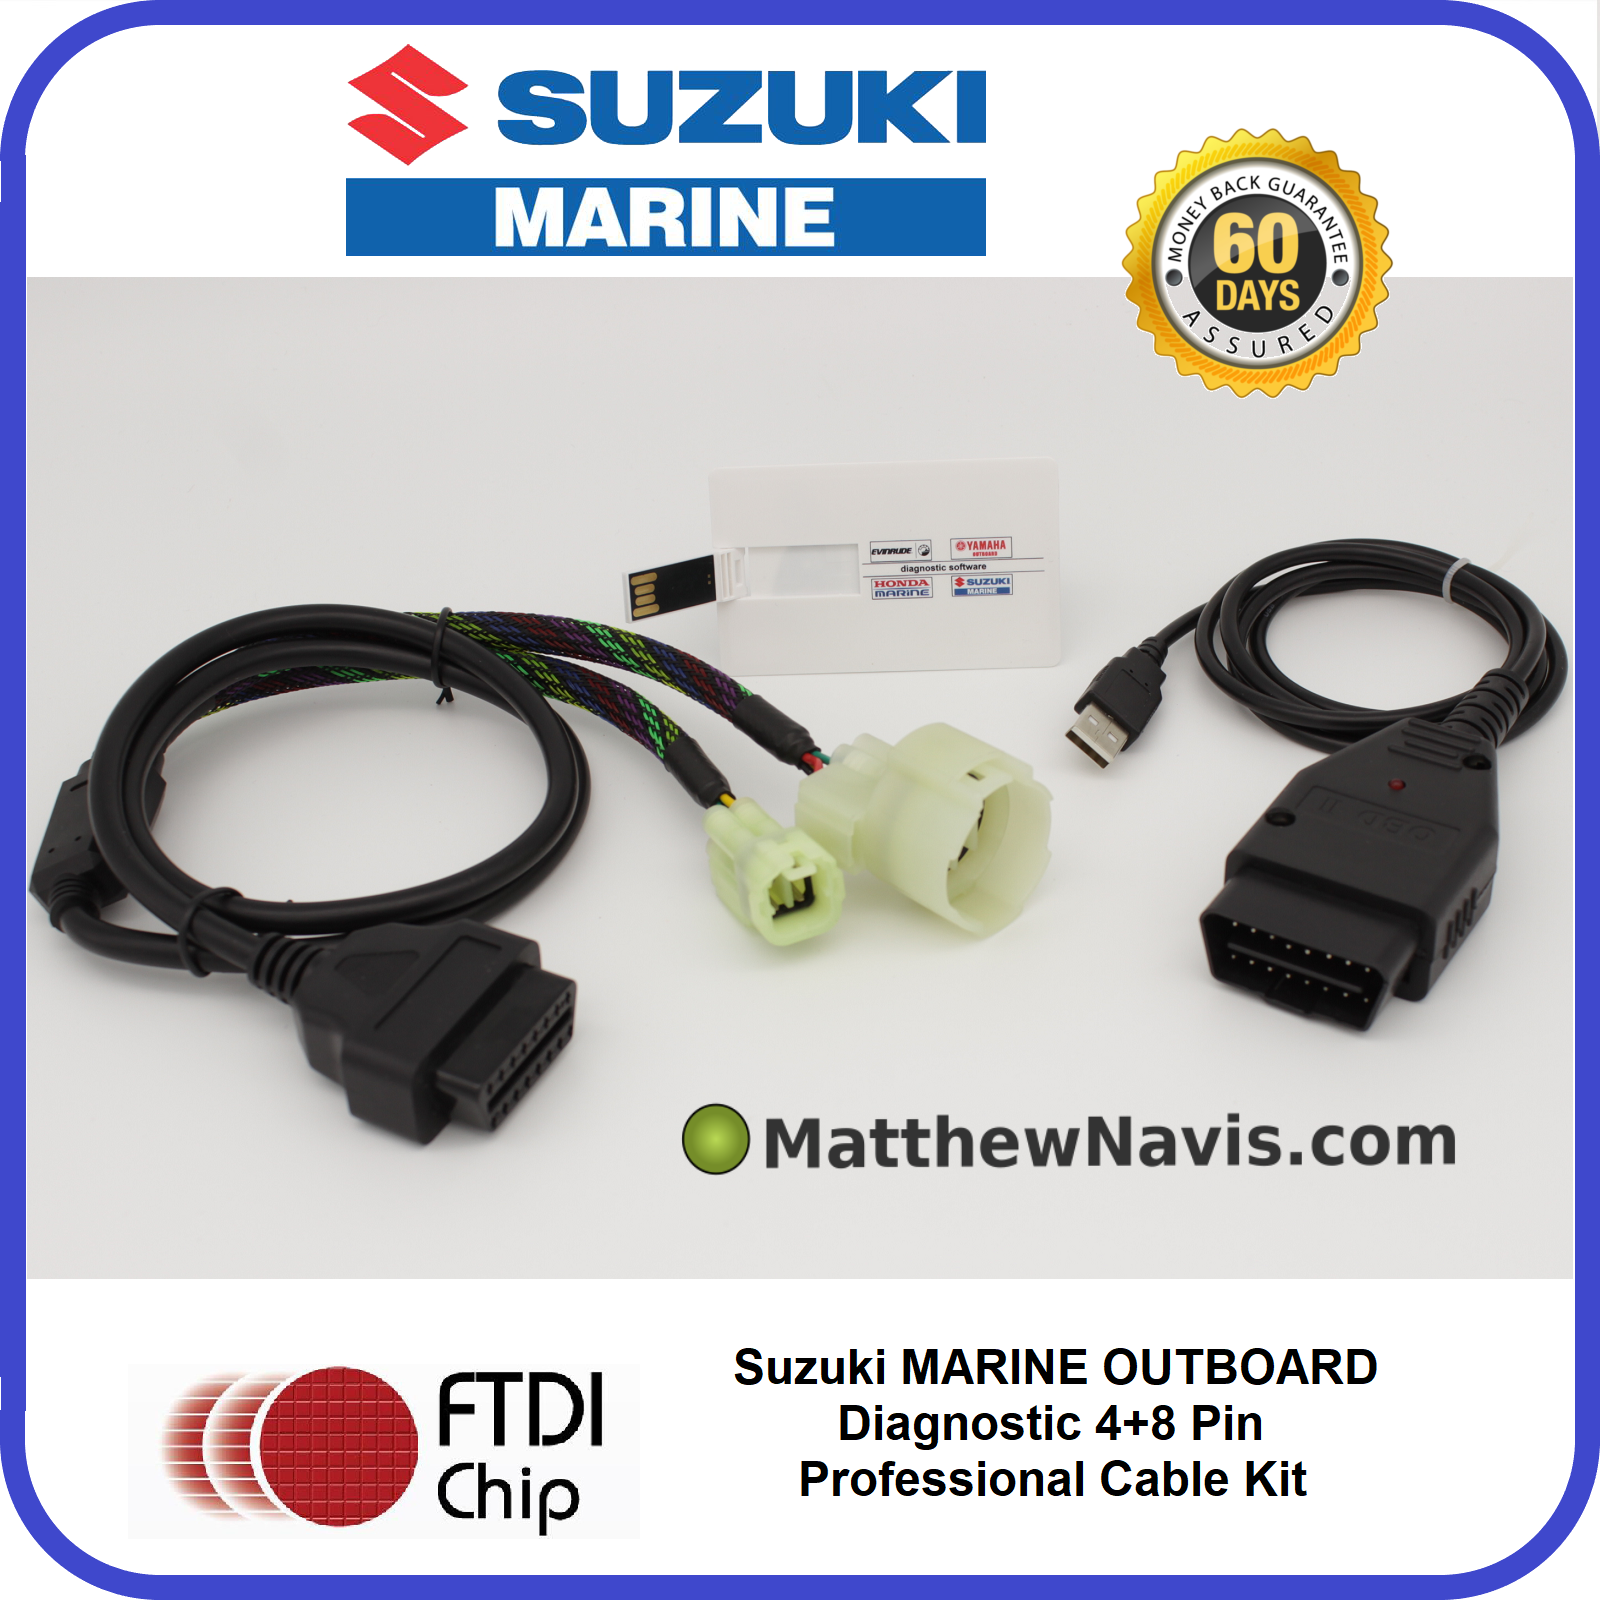 Suzuki Marine Outboard Professional Diagnostic Cable Kit And Software Sds 8.50